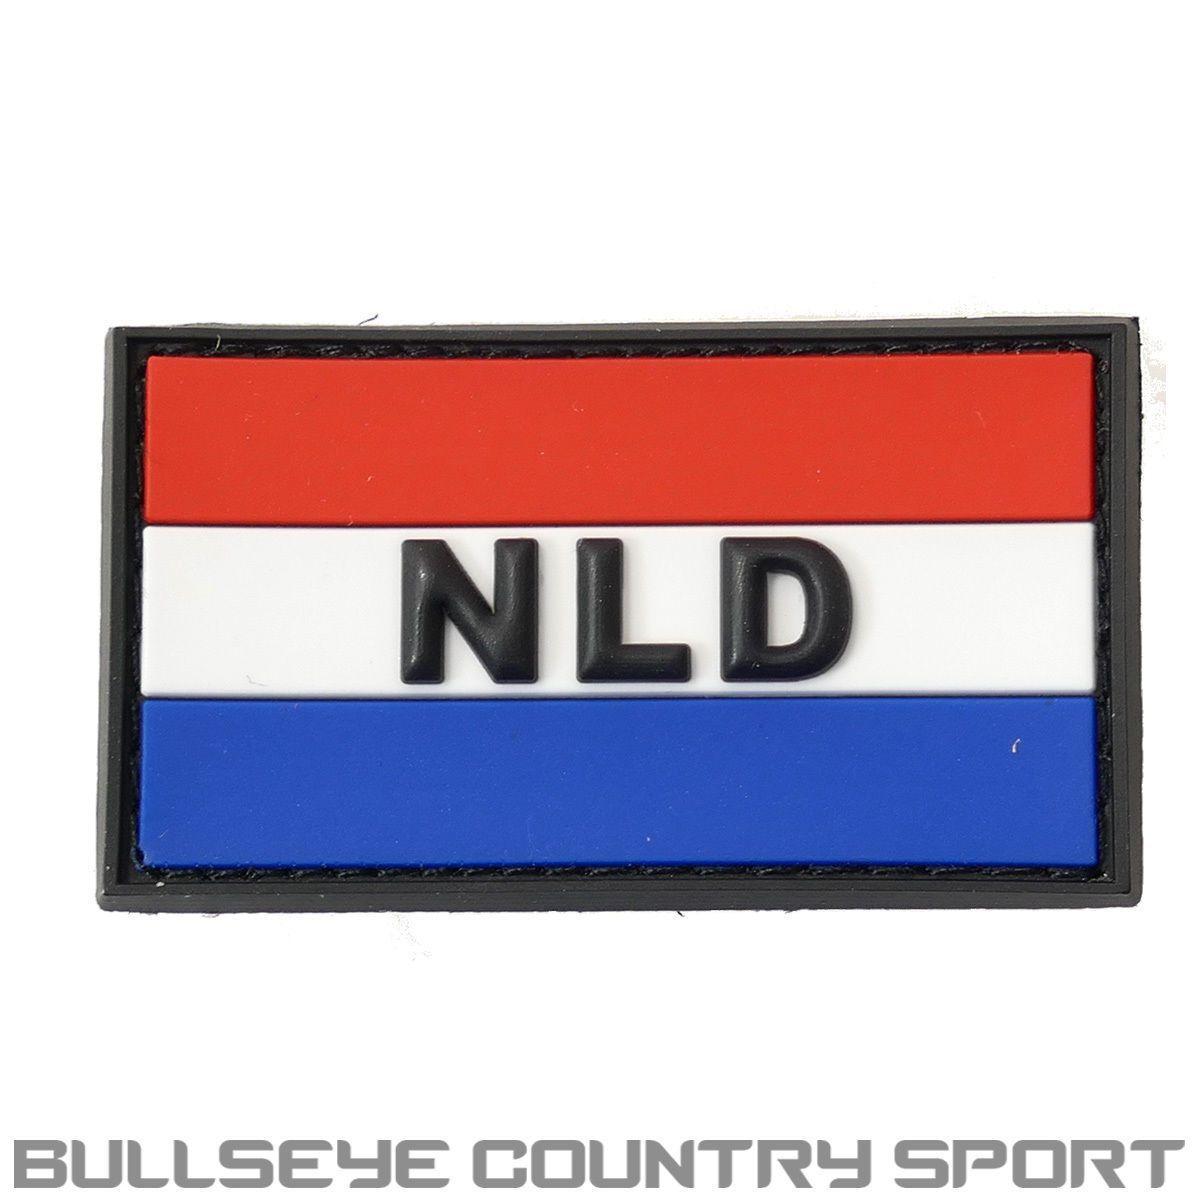 Red White Blue Rectangle Logo - PVC RUBBER MORAL PATCH NETHERLANDS FLAG RED WHITE BLUE AIRSOFT VELCRO